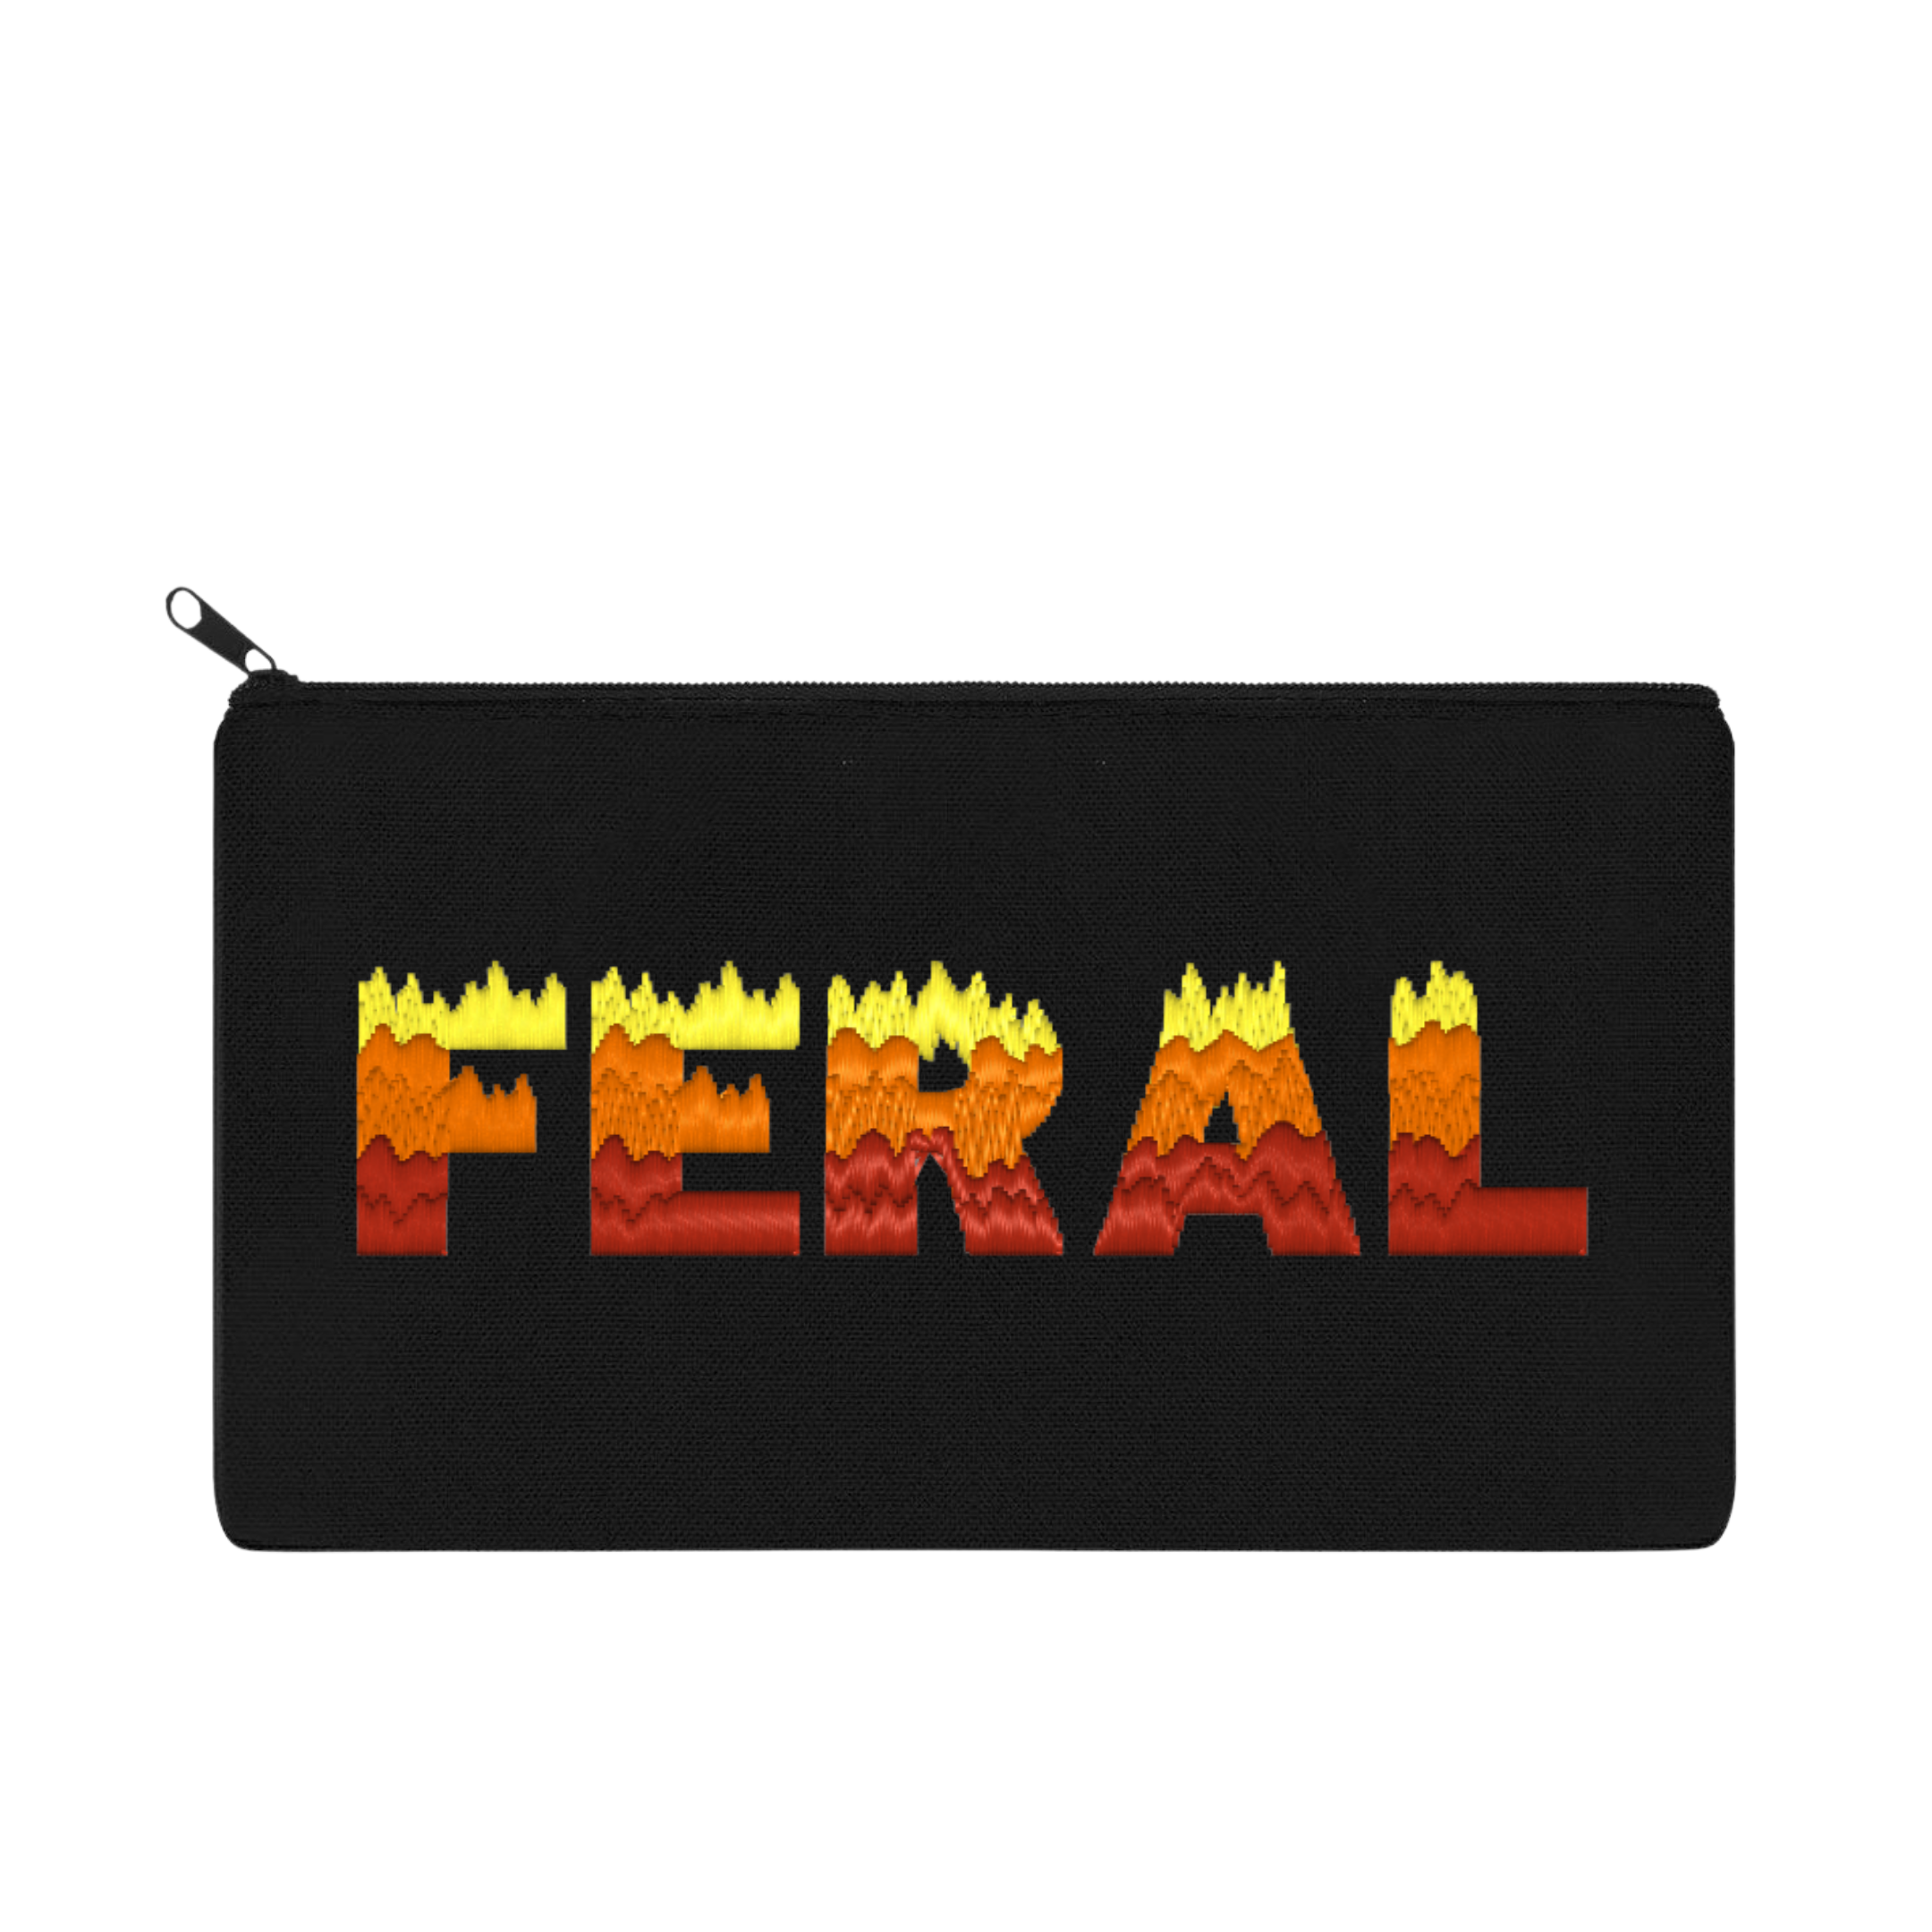 FERAL Flame Font Embroidered Multipurpose Zipper Pouch Bag